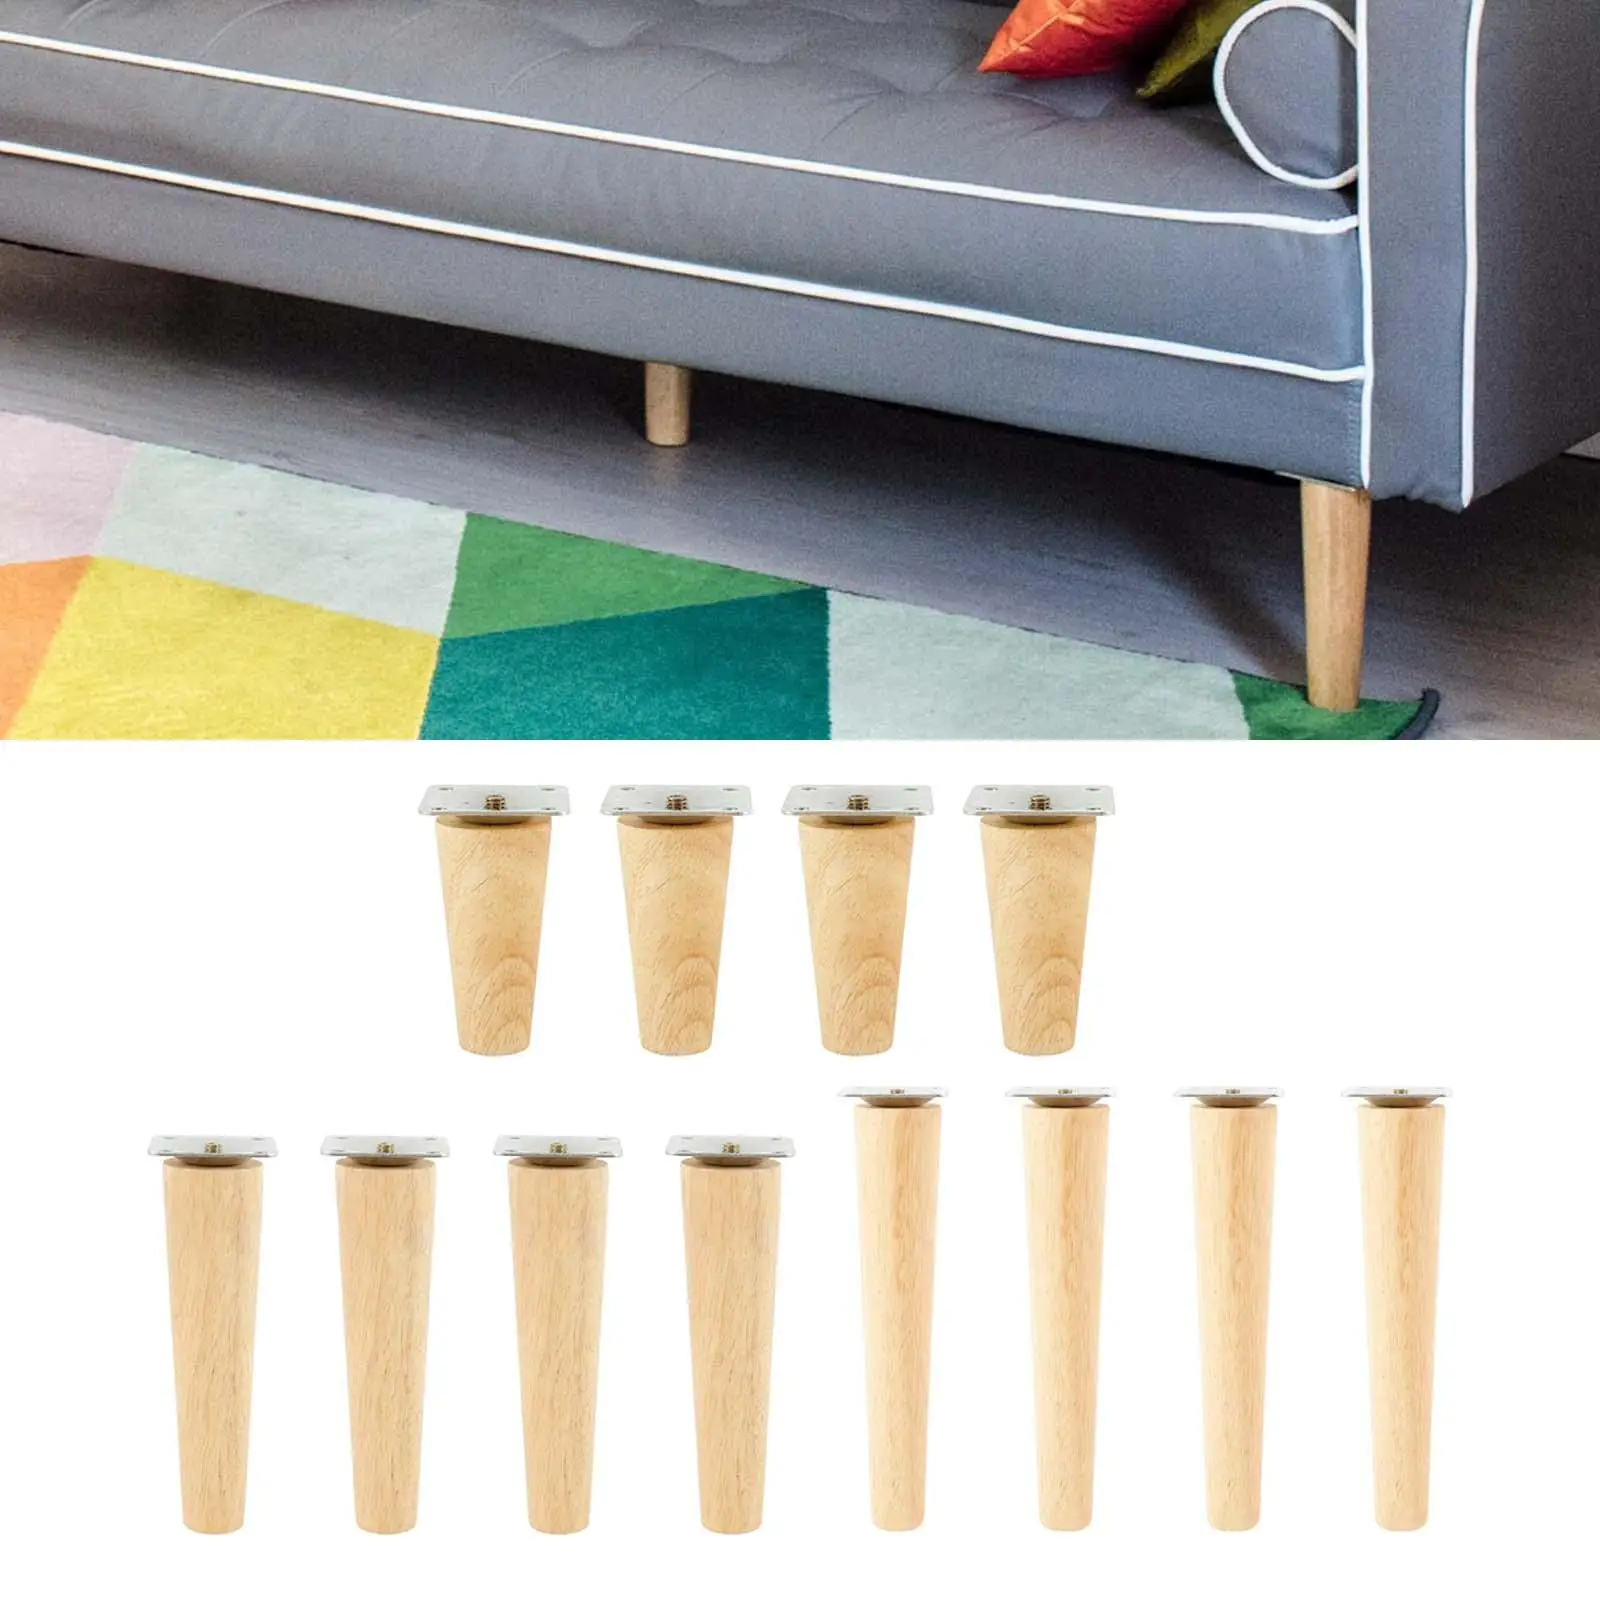 Modern Wooden Furniture Leg Sofa Legs Furniture Legs Durable Multifunction Sturdy Stable for Table Bed Legs